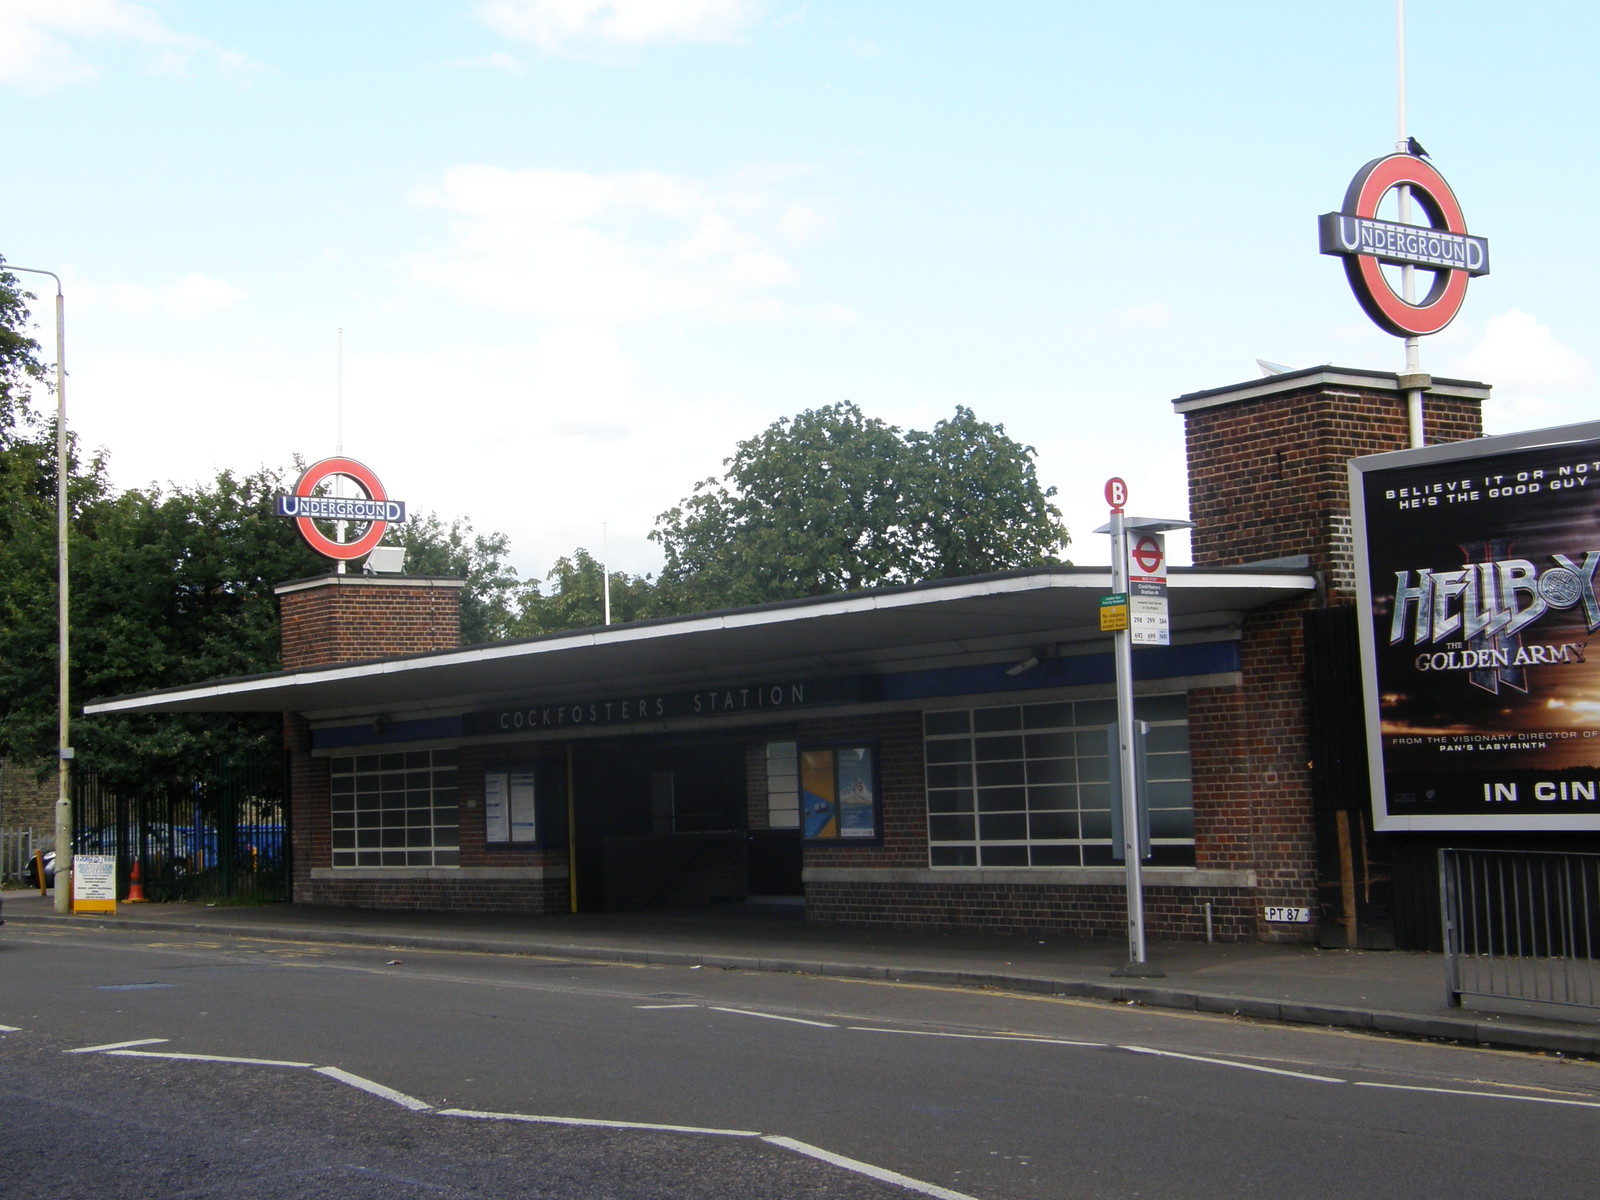 Image from Bounds Green to Cockfosters